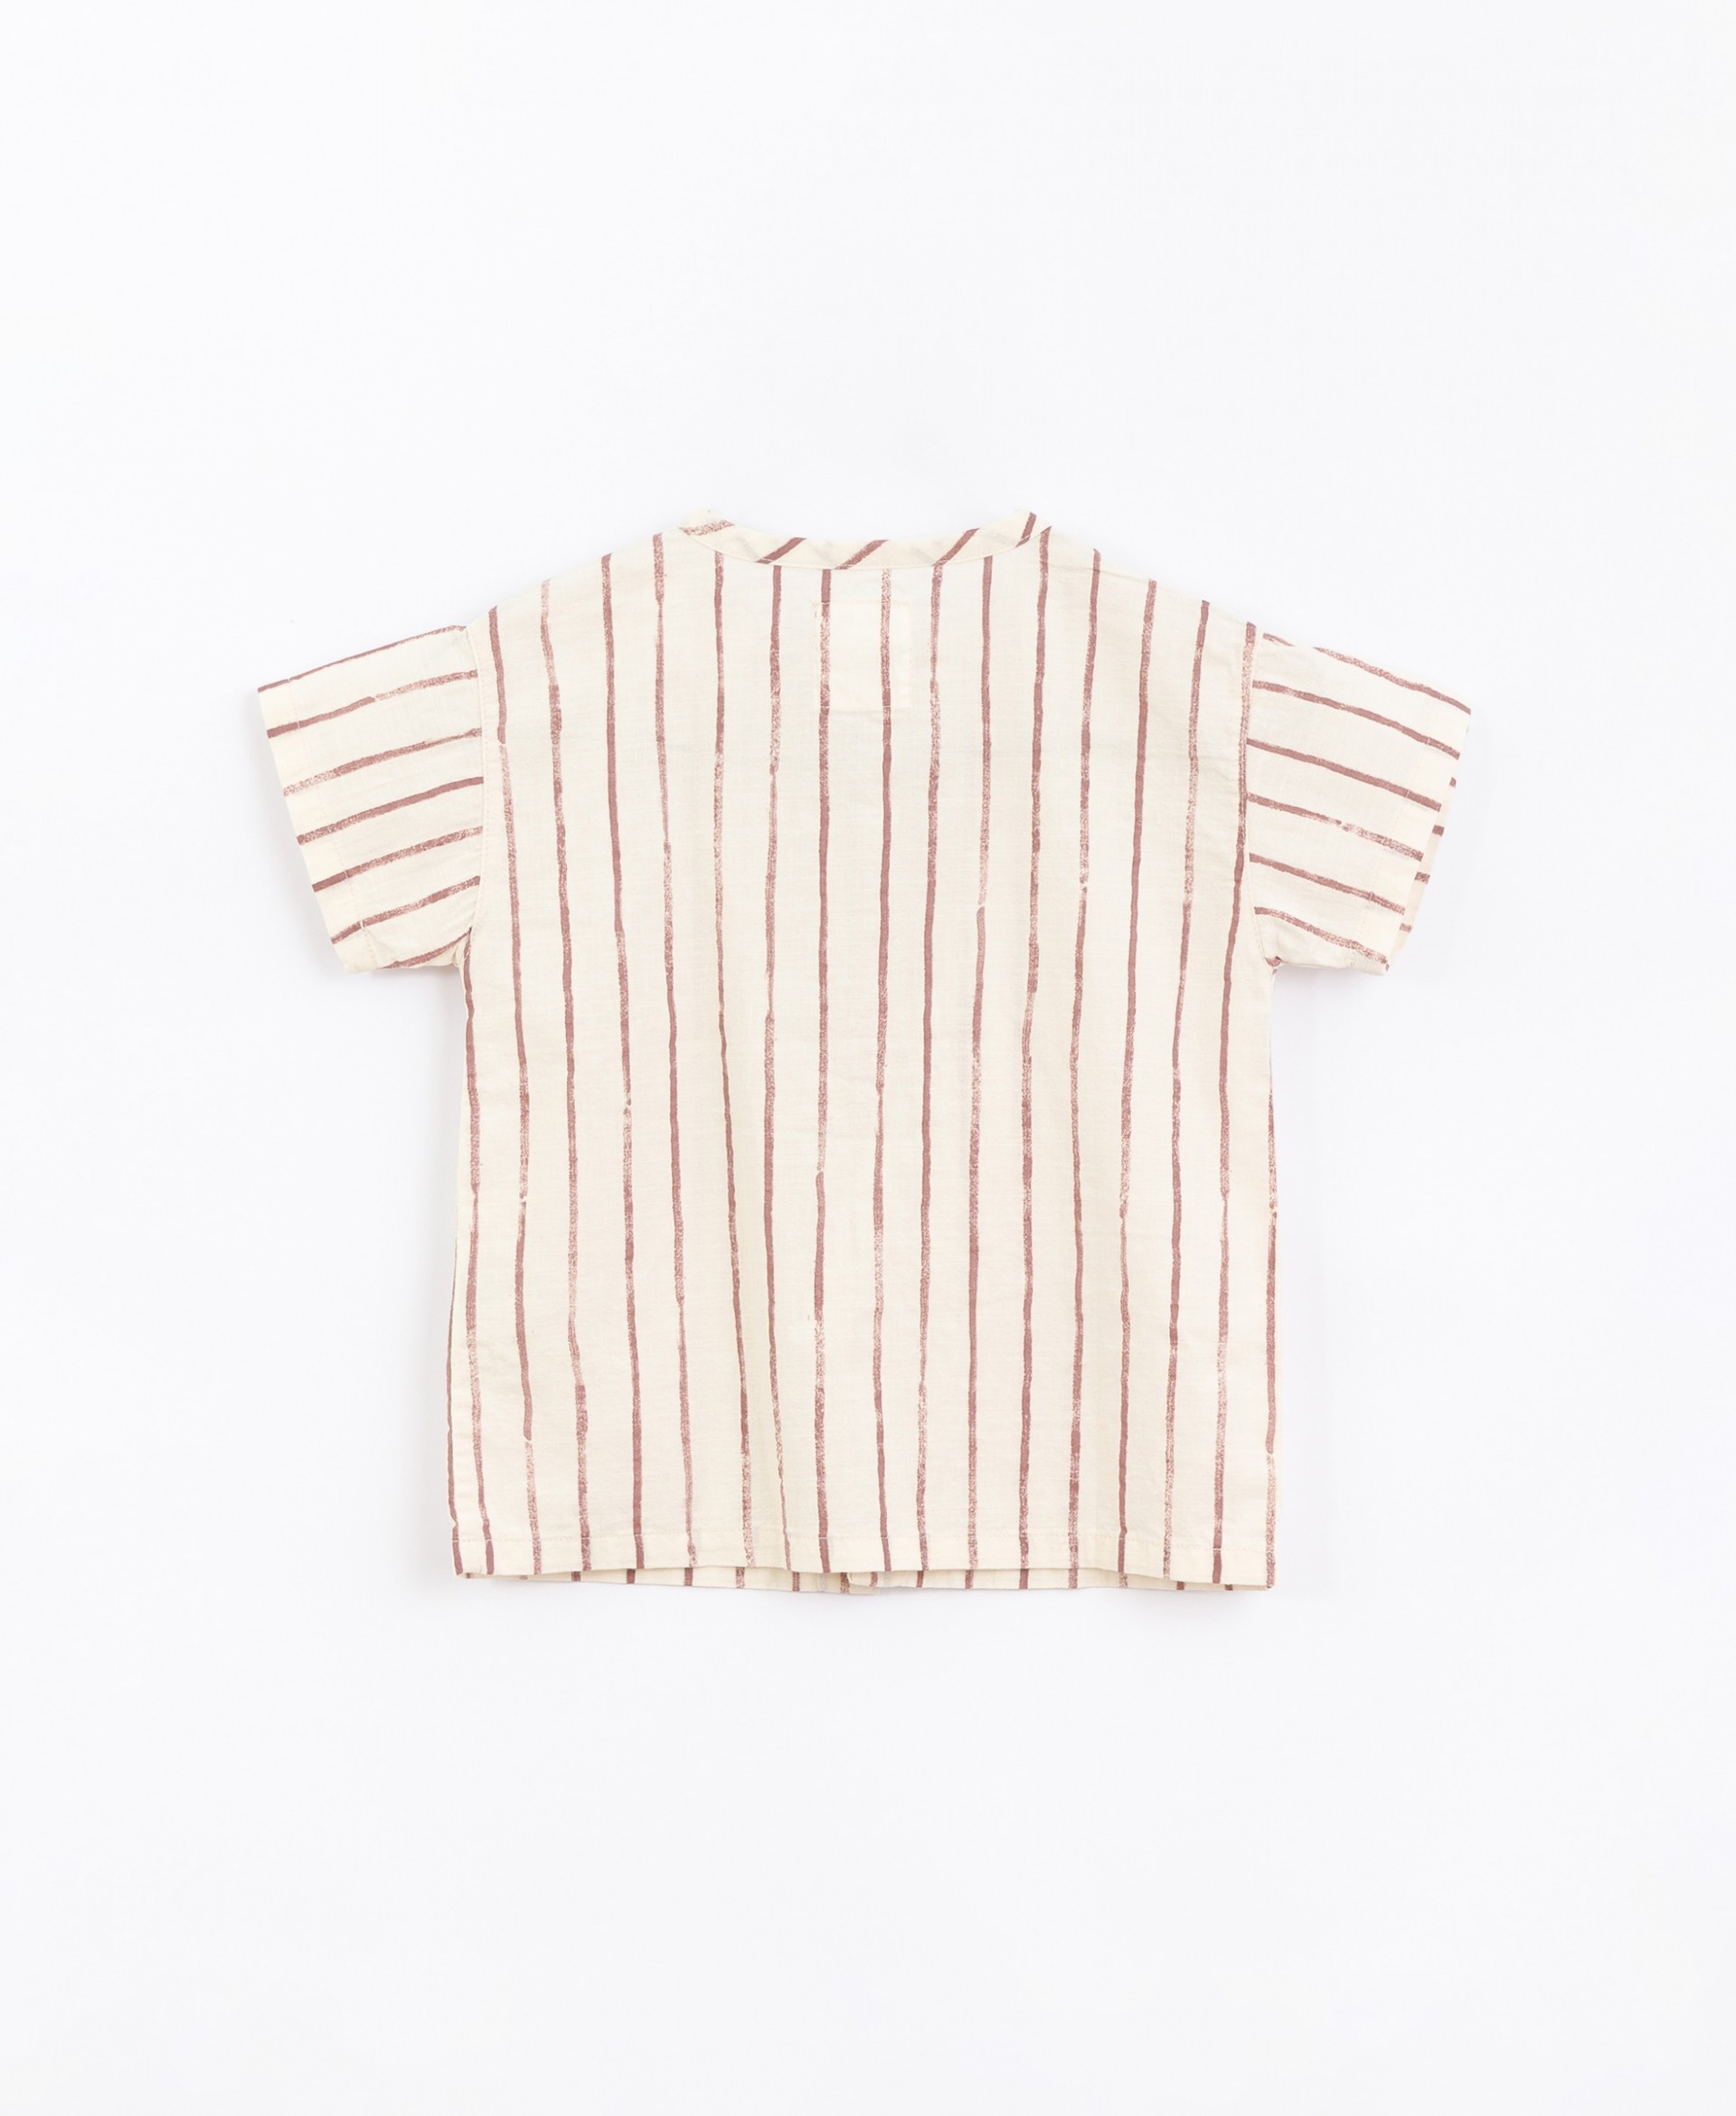 Shirt in blend of natural fibers | Basketry